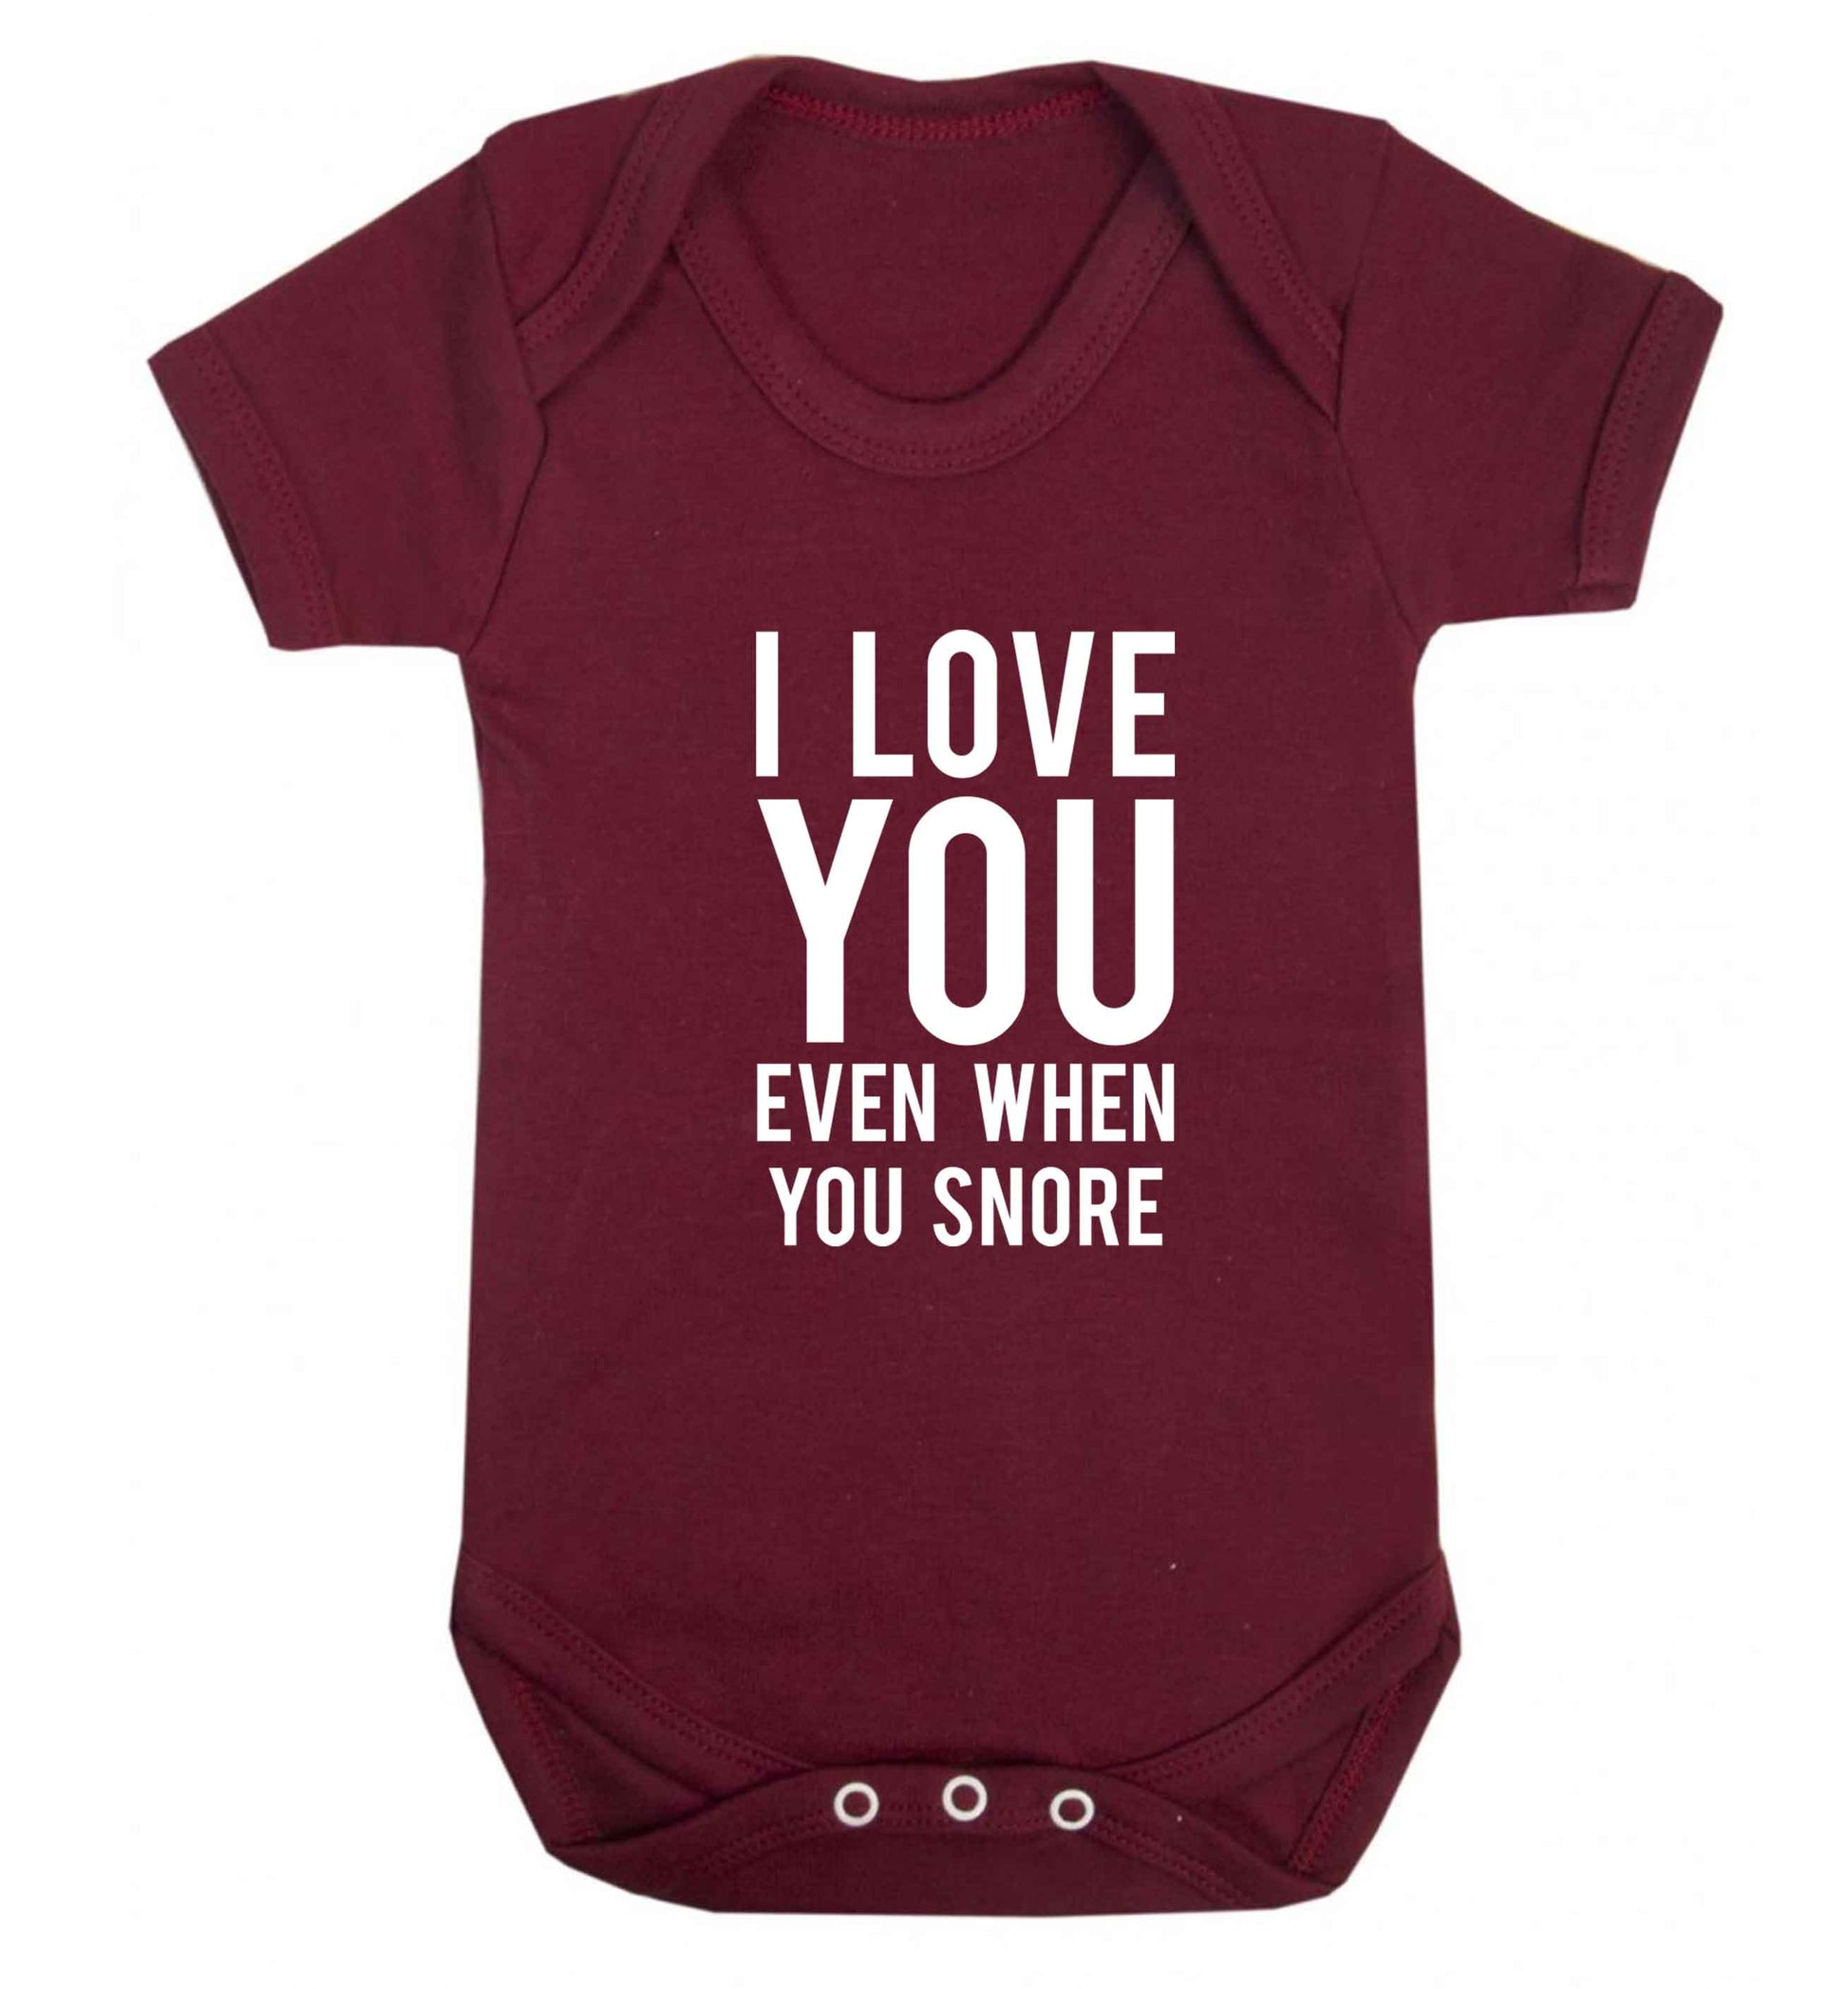 I love you even when you snore baby vest maroon 18-24 months